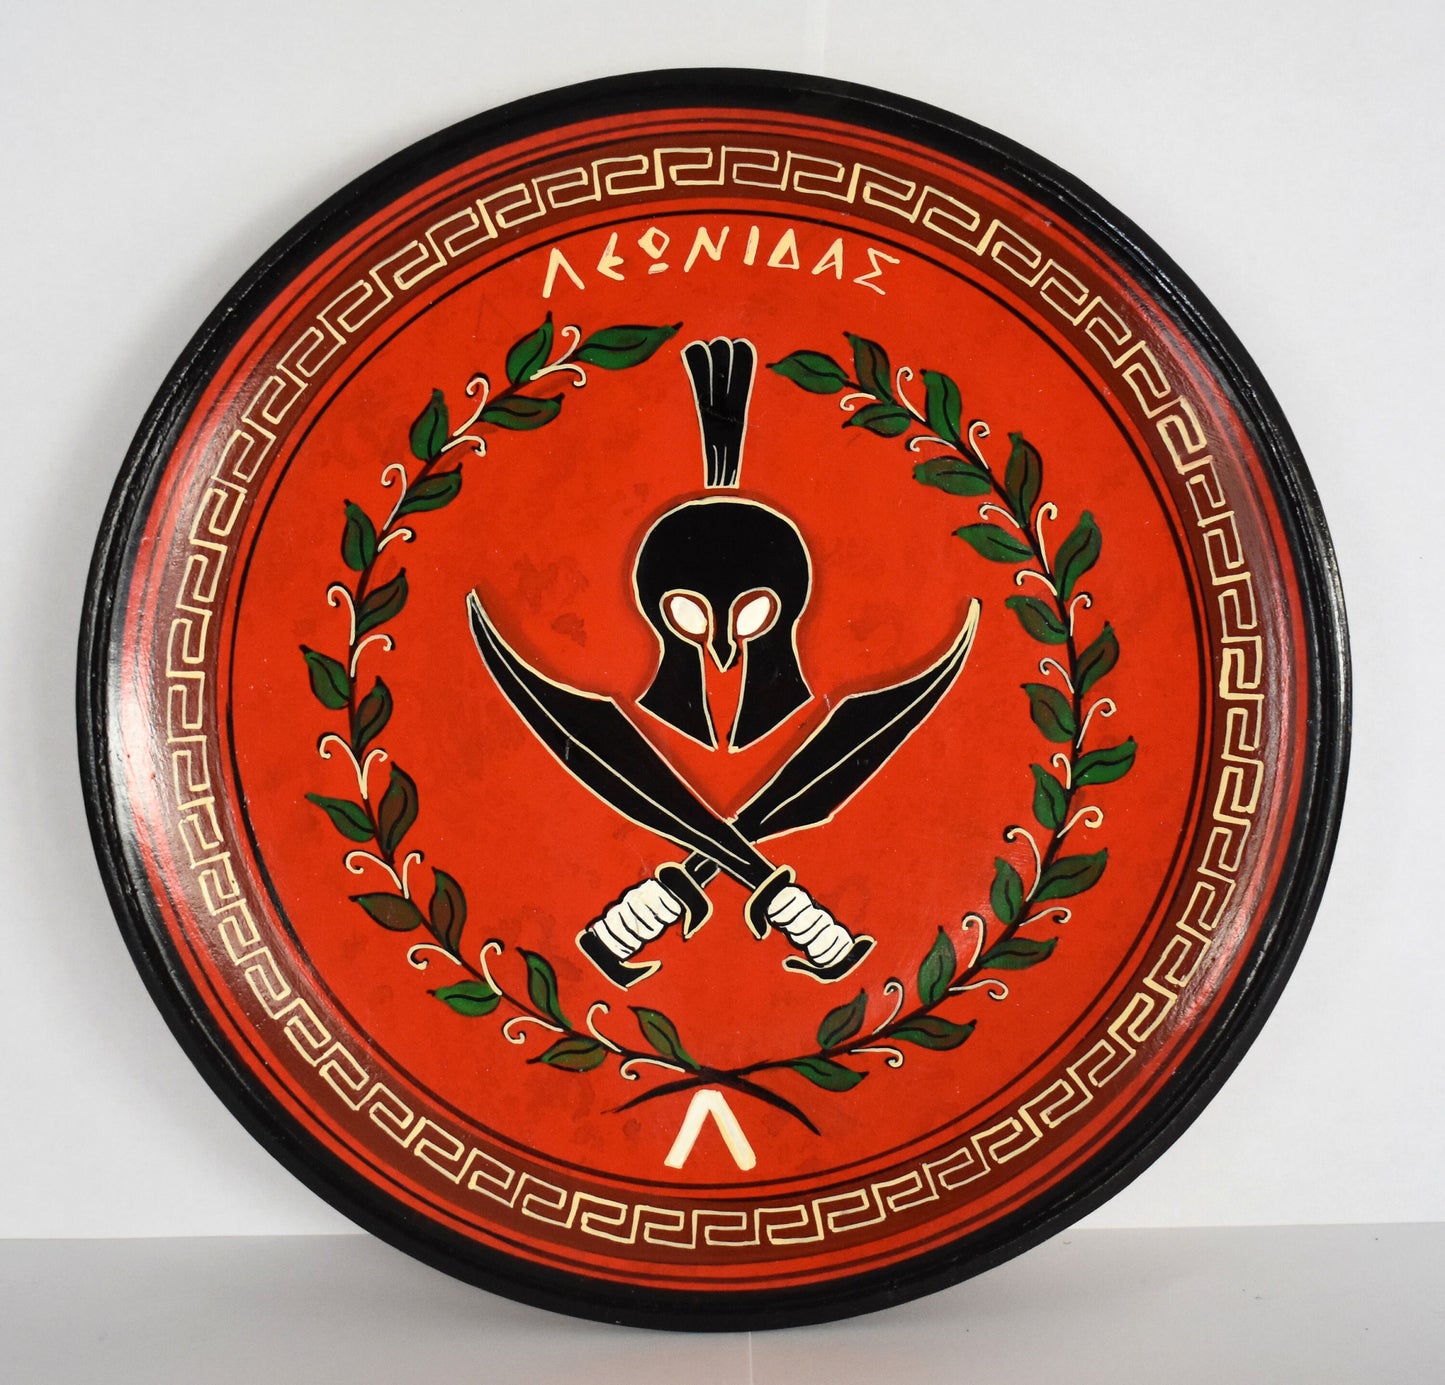 King Leonidas Weapons - 300 Spartans - Thermopylae - Kotinos, Olive Wreath - Meander motif - Ceramic - Handmade in Greece